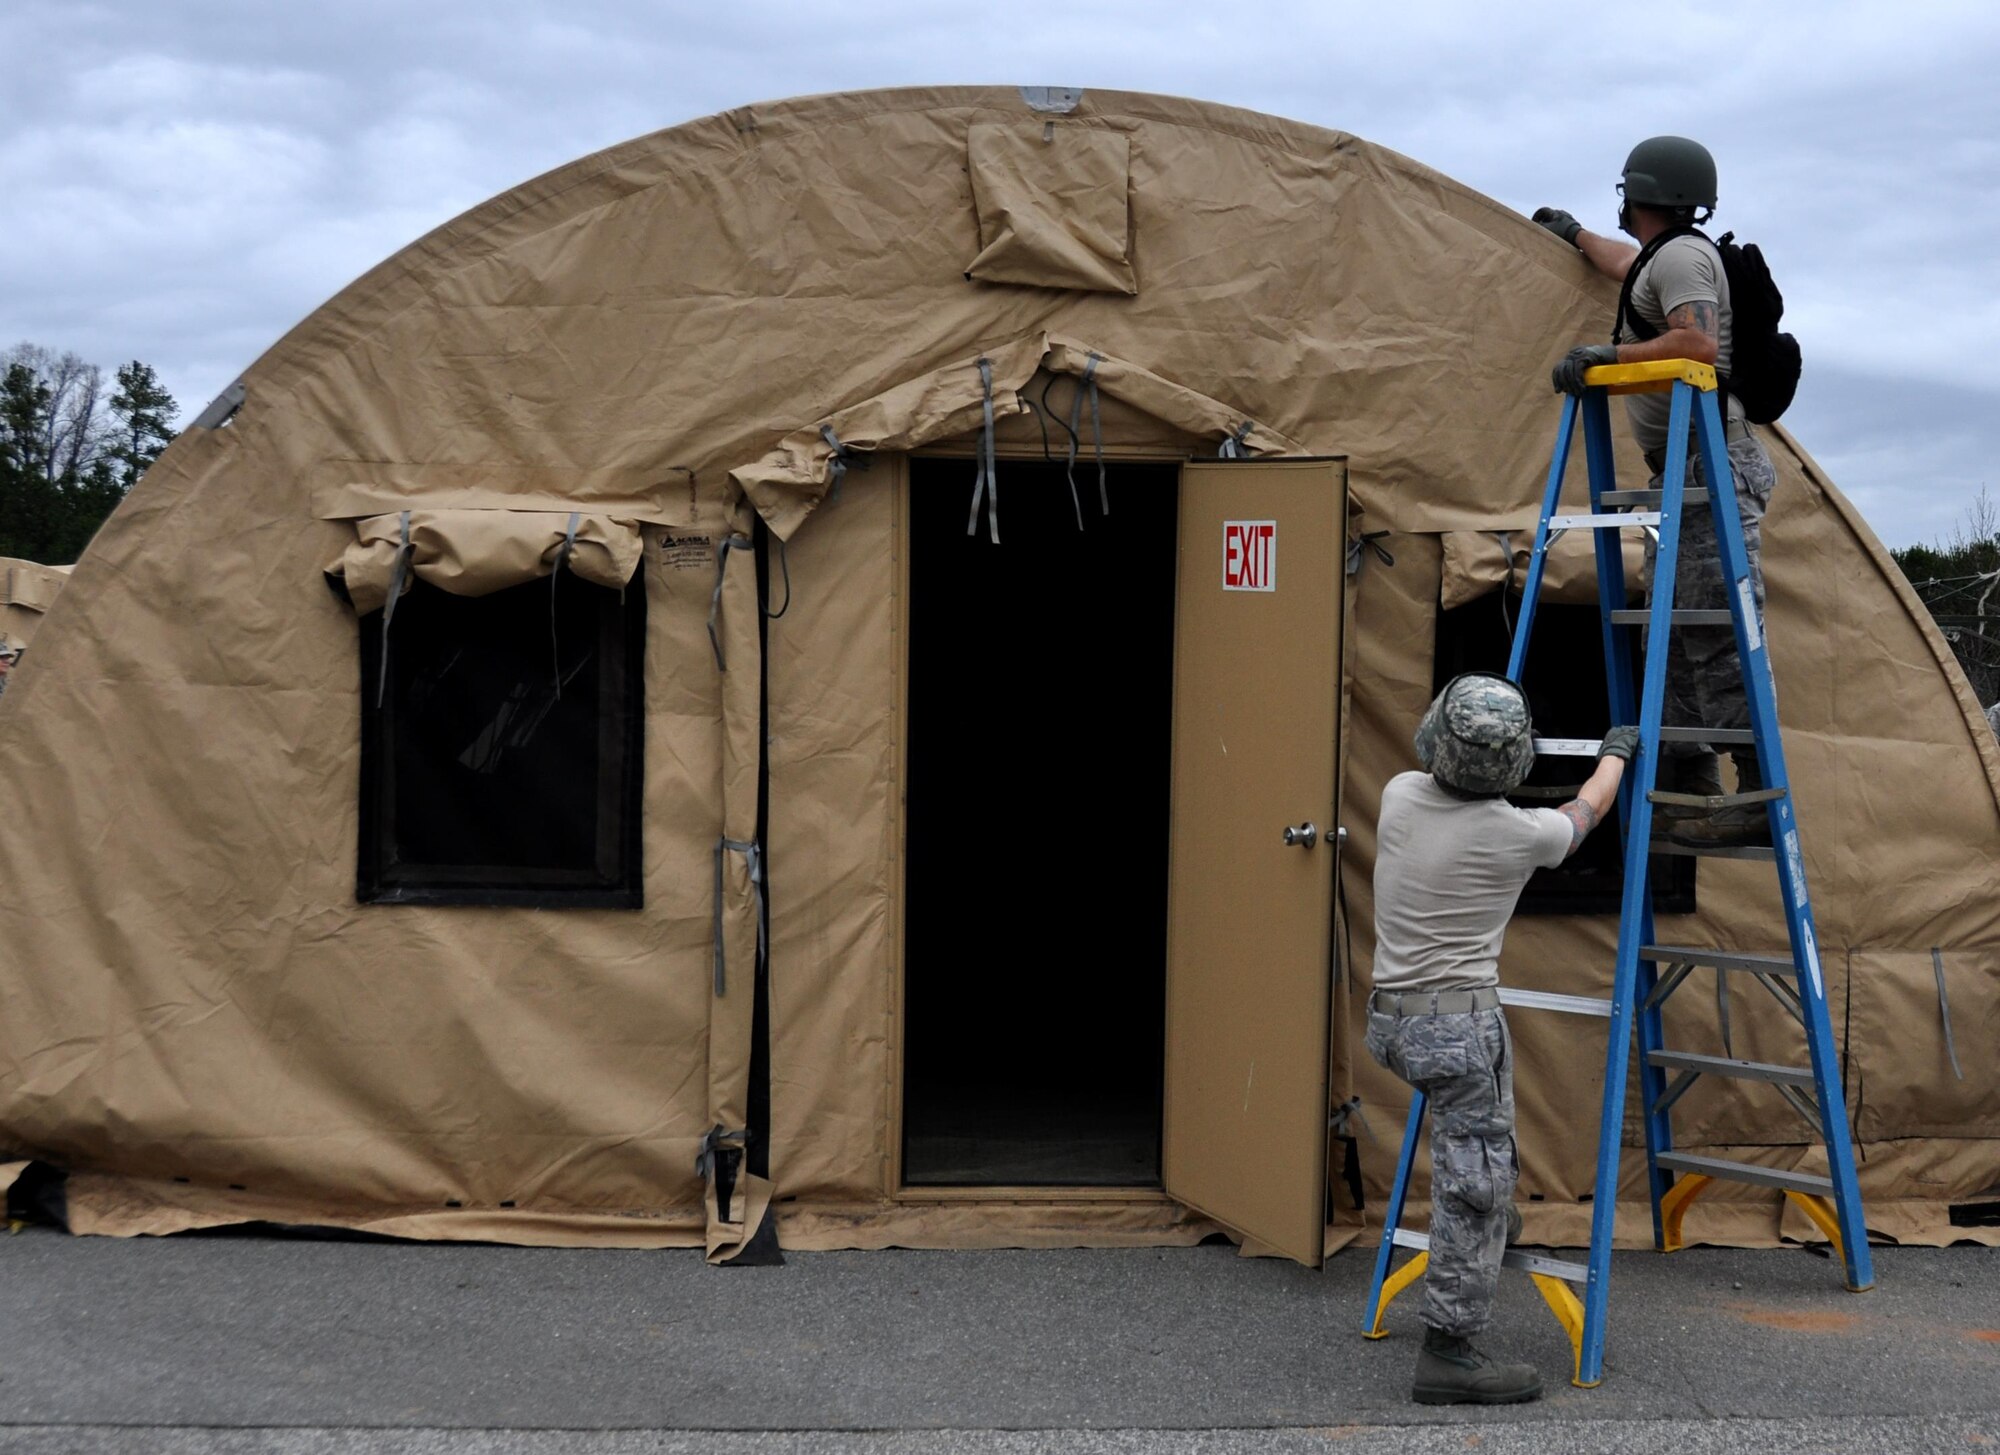 Airmen from the 911th Force Support Squadron, Pittsburgh, Pa. connect the walls of a tent to its poles during the Readiness Challenge for Force Support Silver Flag at Dobbins Air Reserve Base, Georgia, March 12, 2015. The challenge consisted of teams competing against each other in nine different events ranging from following a convoy, building tents, fixing Babington burners, cooking meals, planning lodging, planning a base from scratch, driving a forklift and a scavenger hunt. (U.S. Air Force photo/Senior Airman Daniel Phelps)